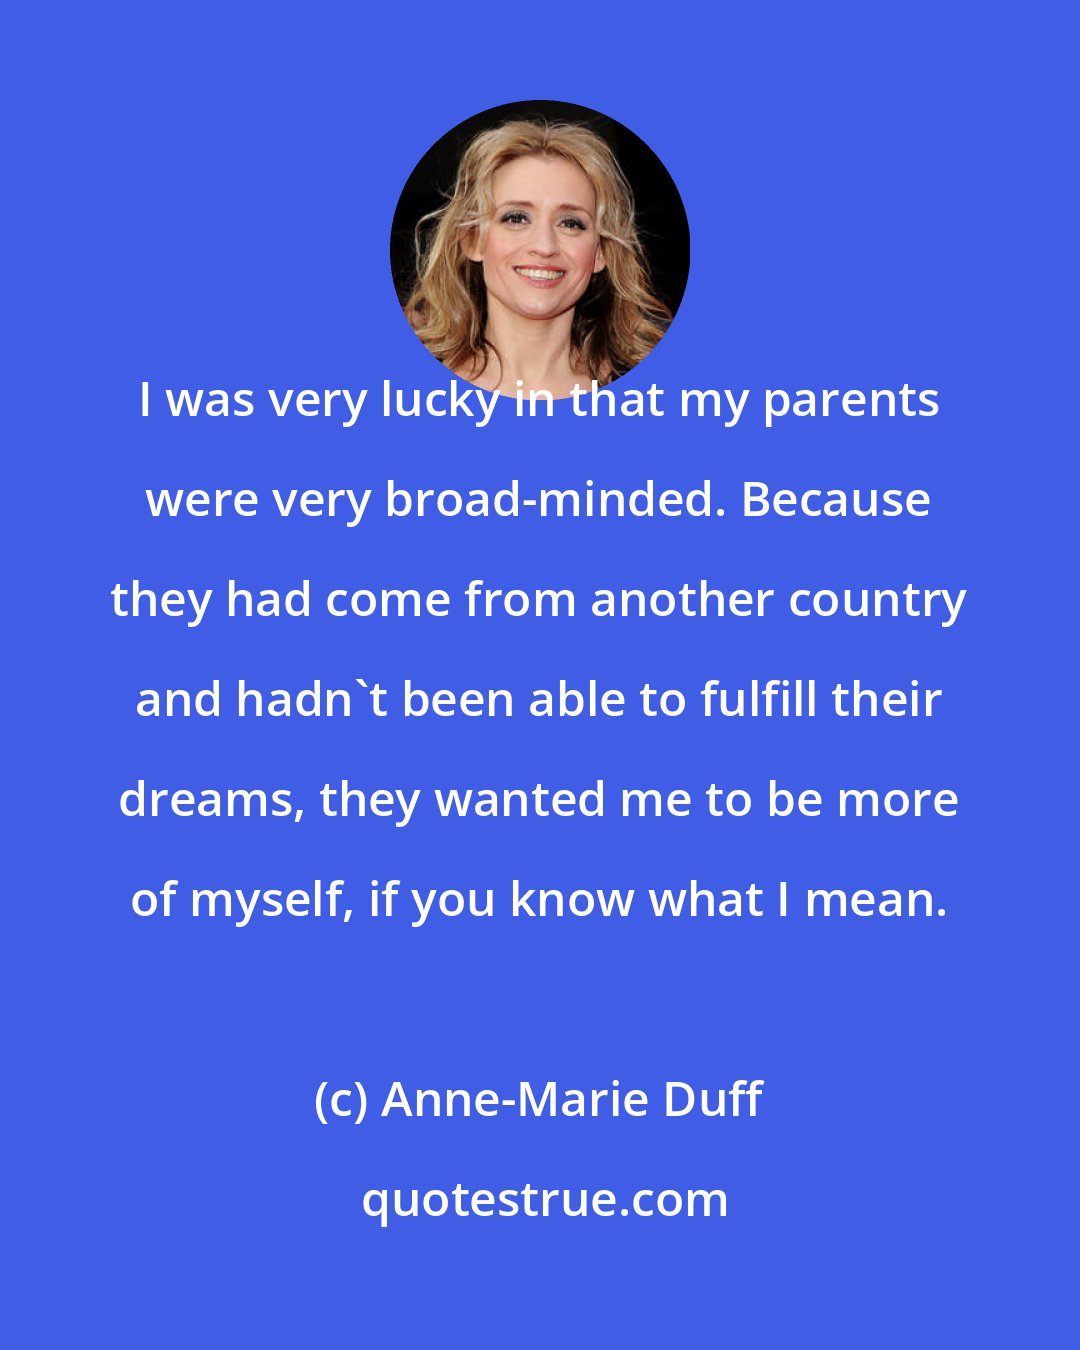 Anne-Marie Duff: I was very lucky in that my parents were very broad-minded. Because they had come from another country and hadn't been able to fulfill their dreams, they wanted me to be more of myself, if you know what I mean.